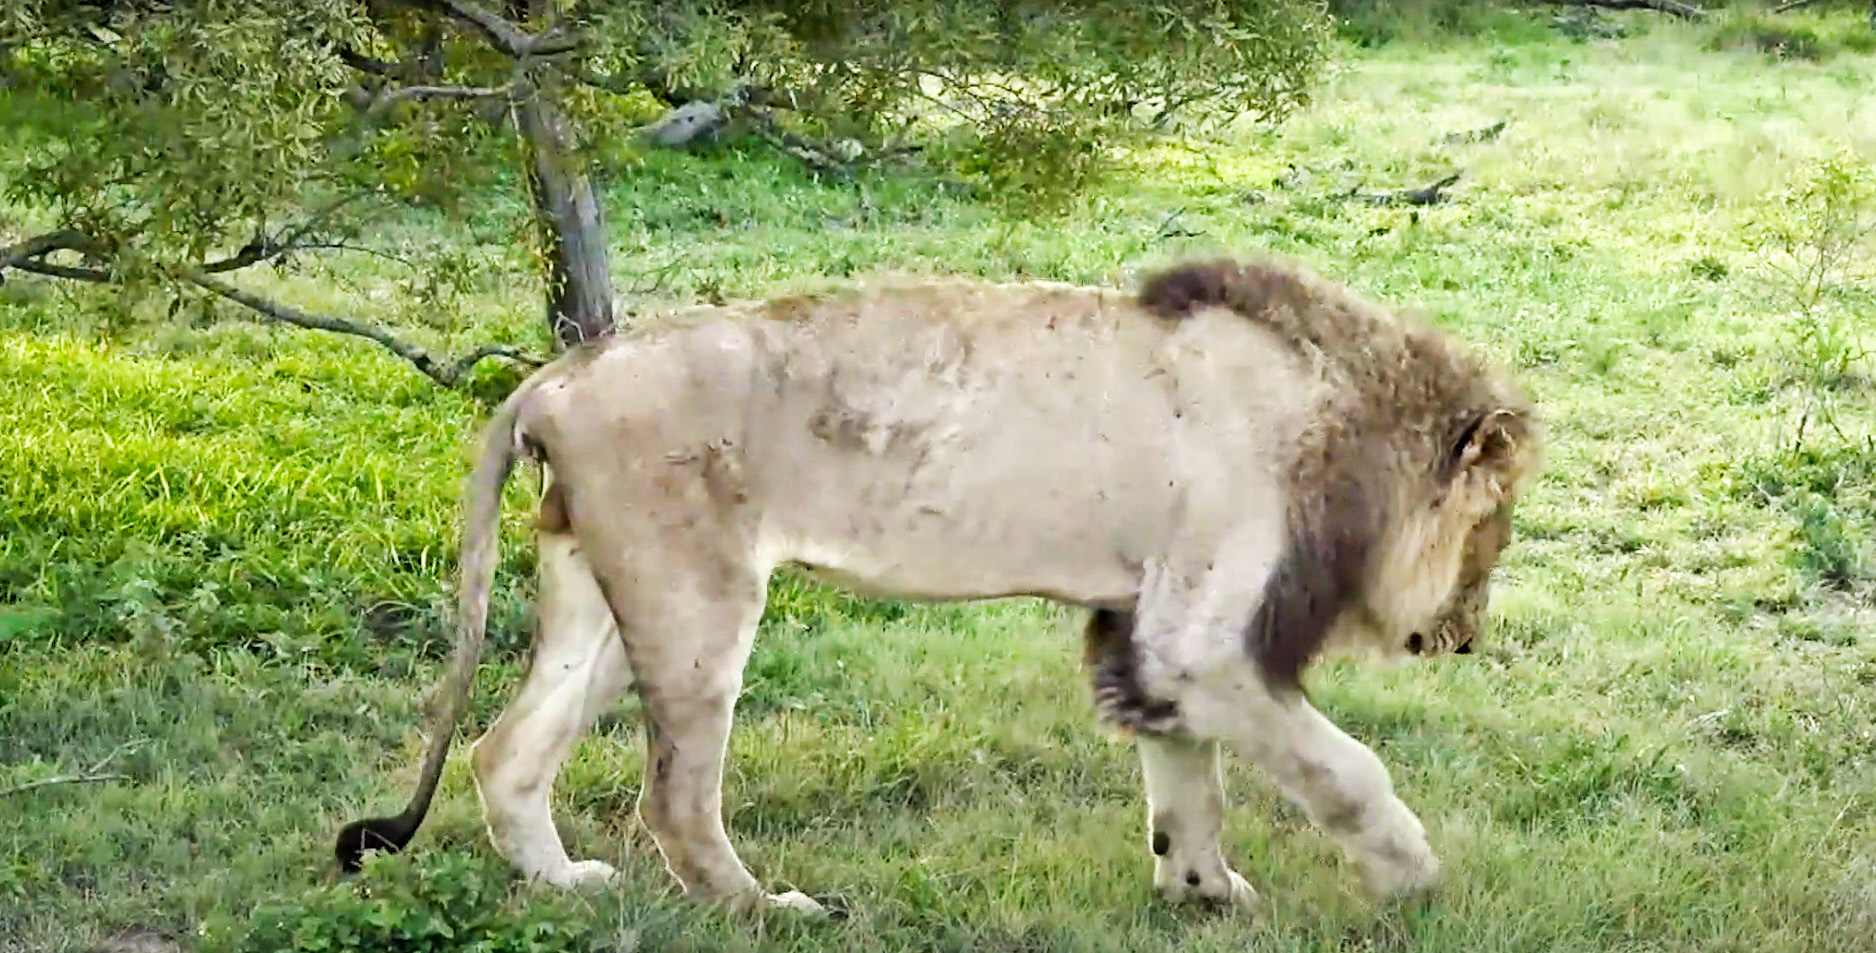 Male Lion, Dark Mane, Has Died after Buffalo Attack